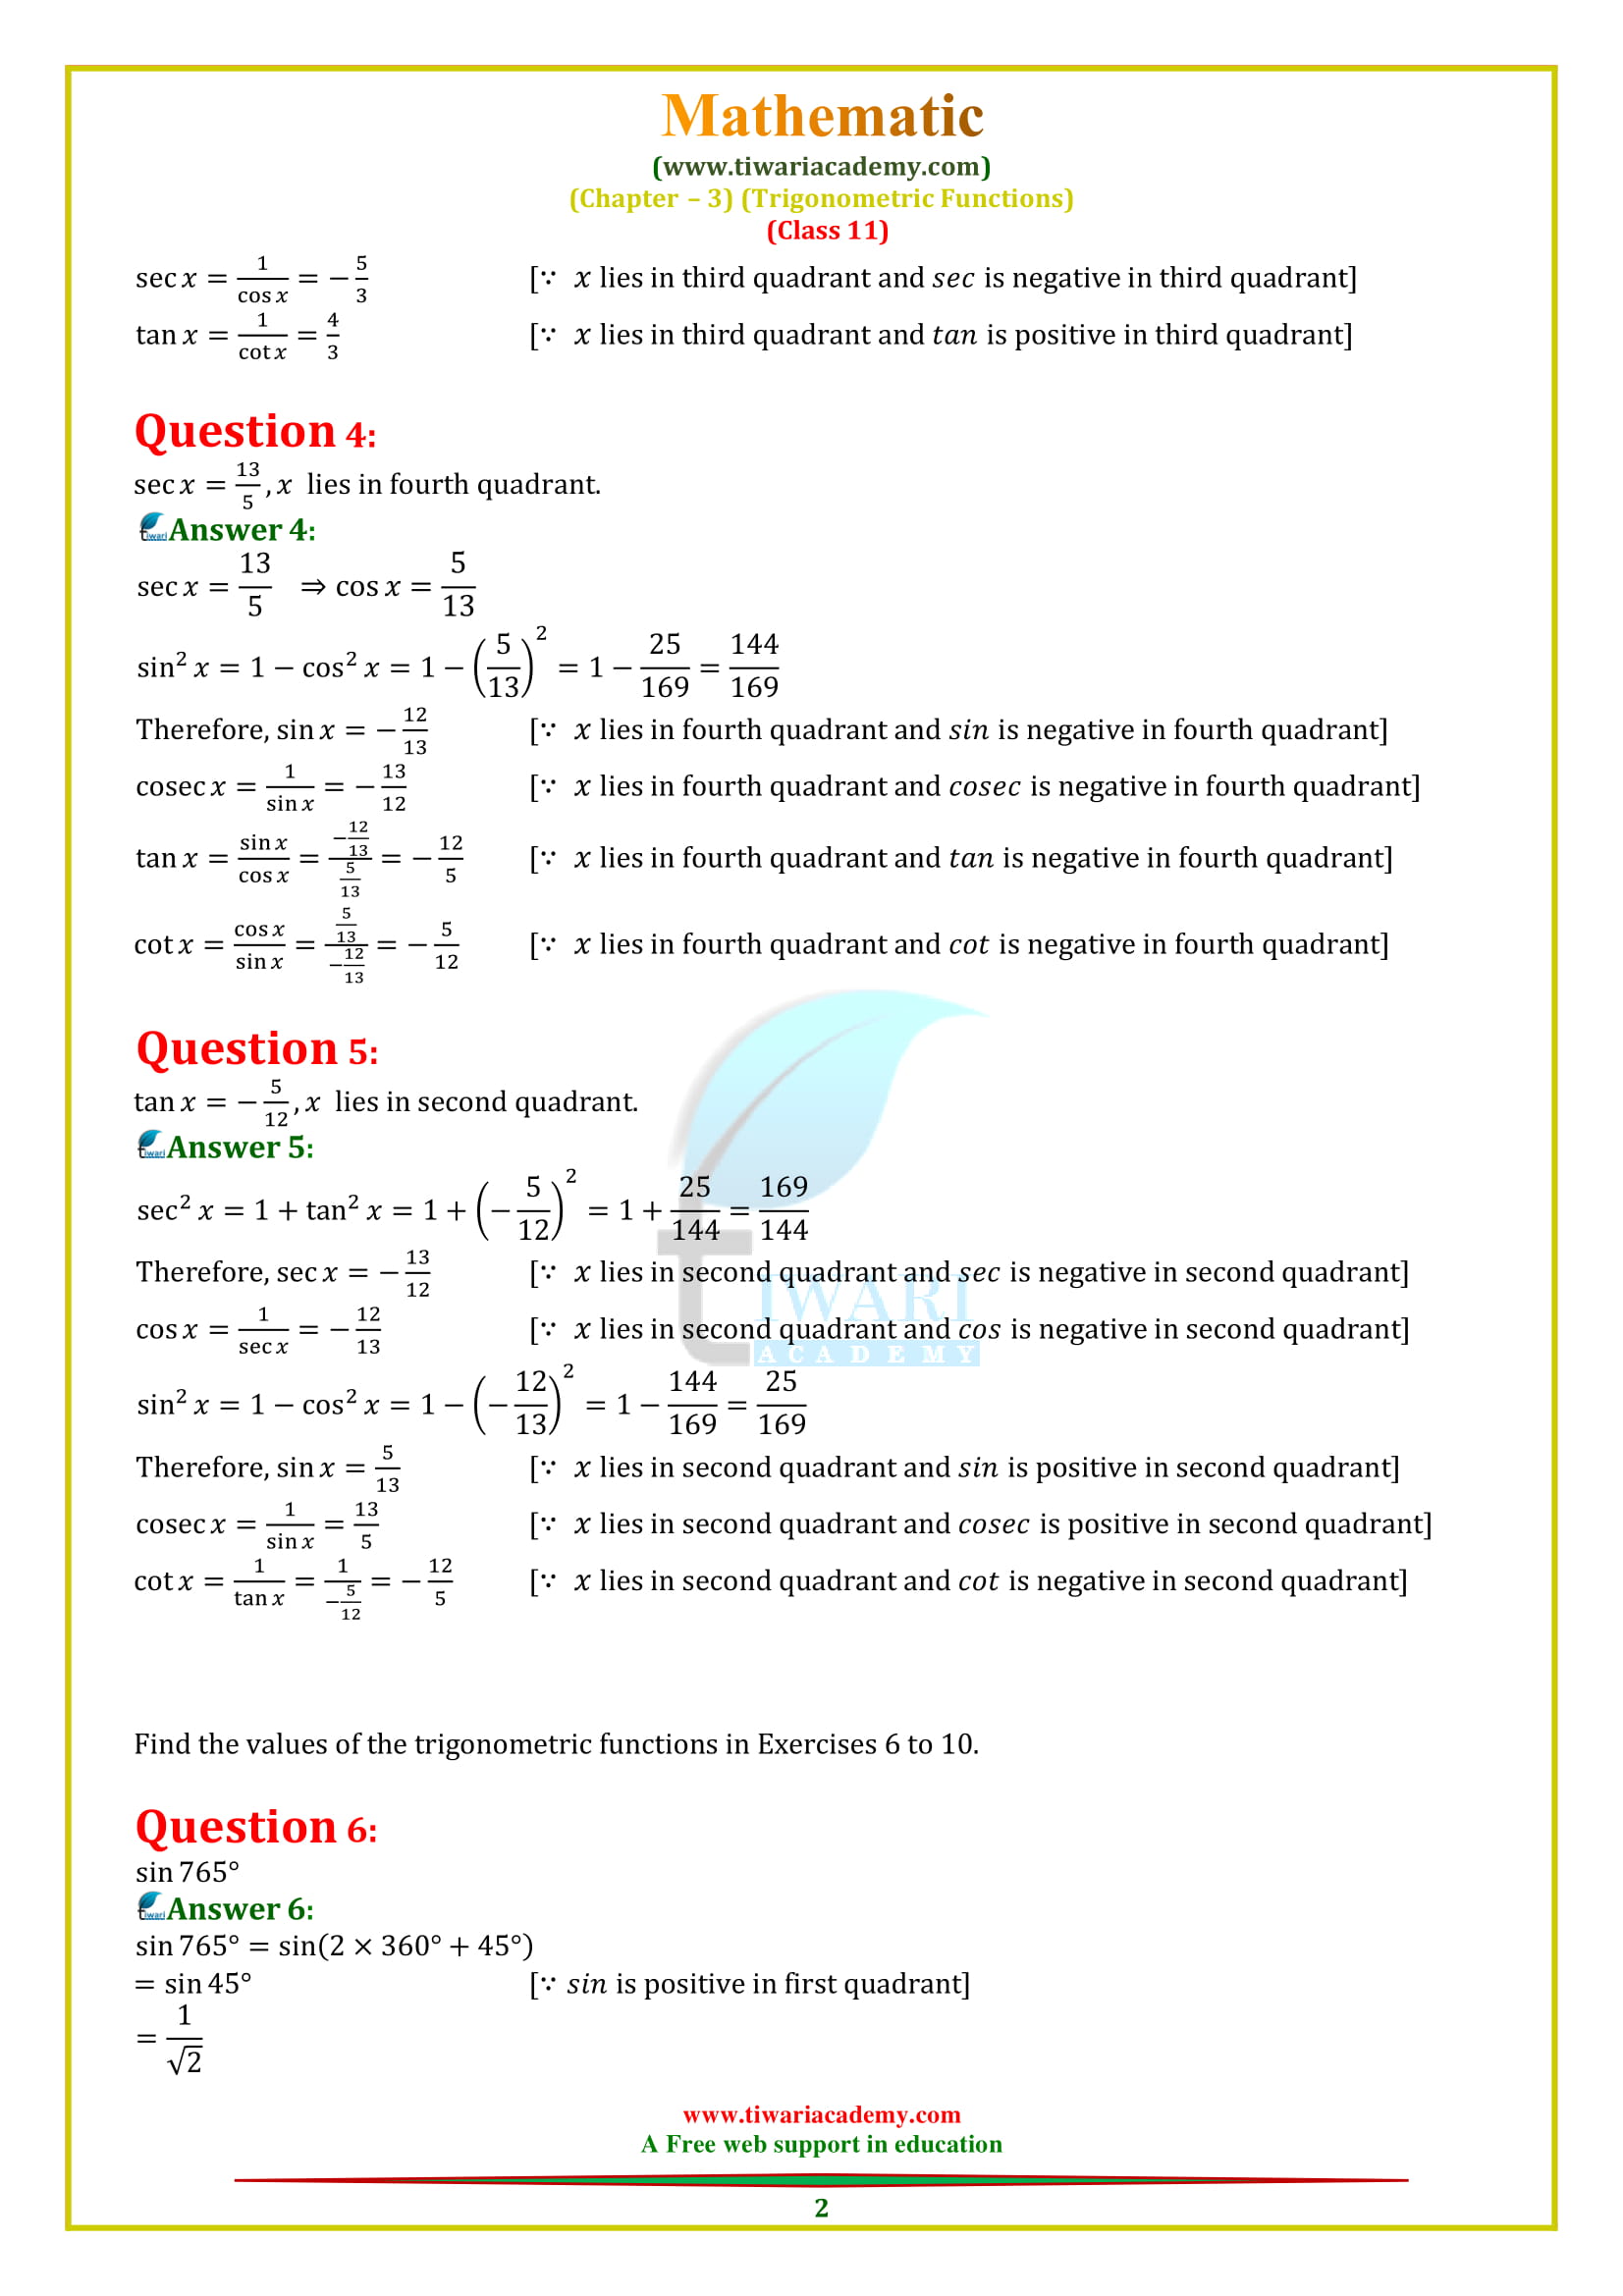 NCERT Solutions for Class 11 Maths Chapter 3 Exercise 3.2 updated for 2018-19.